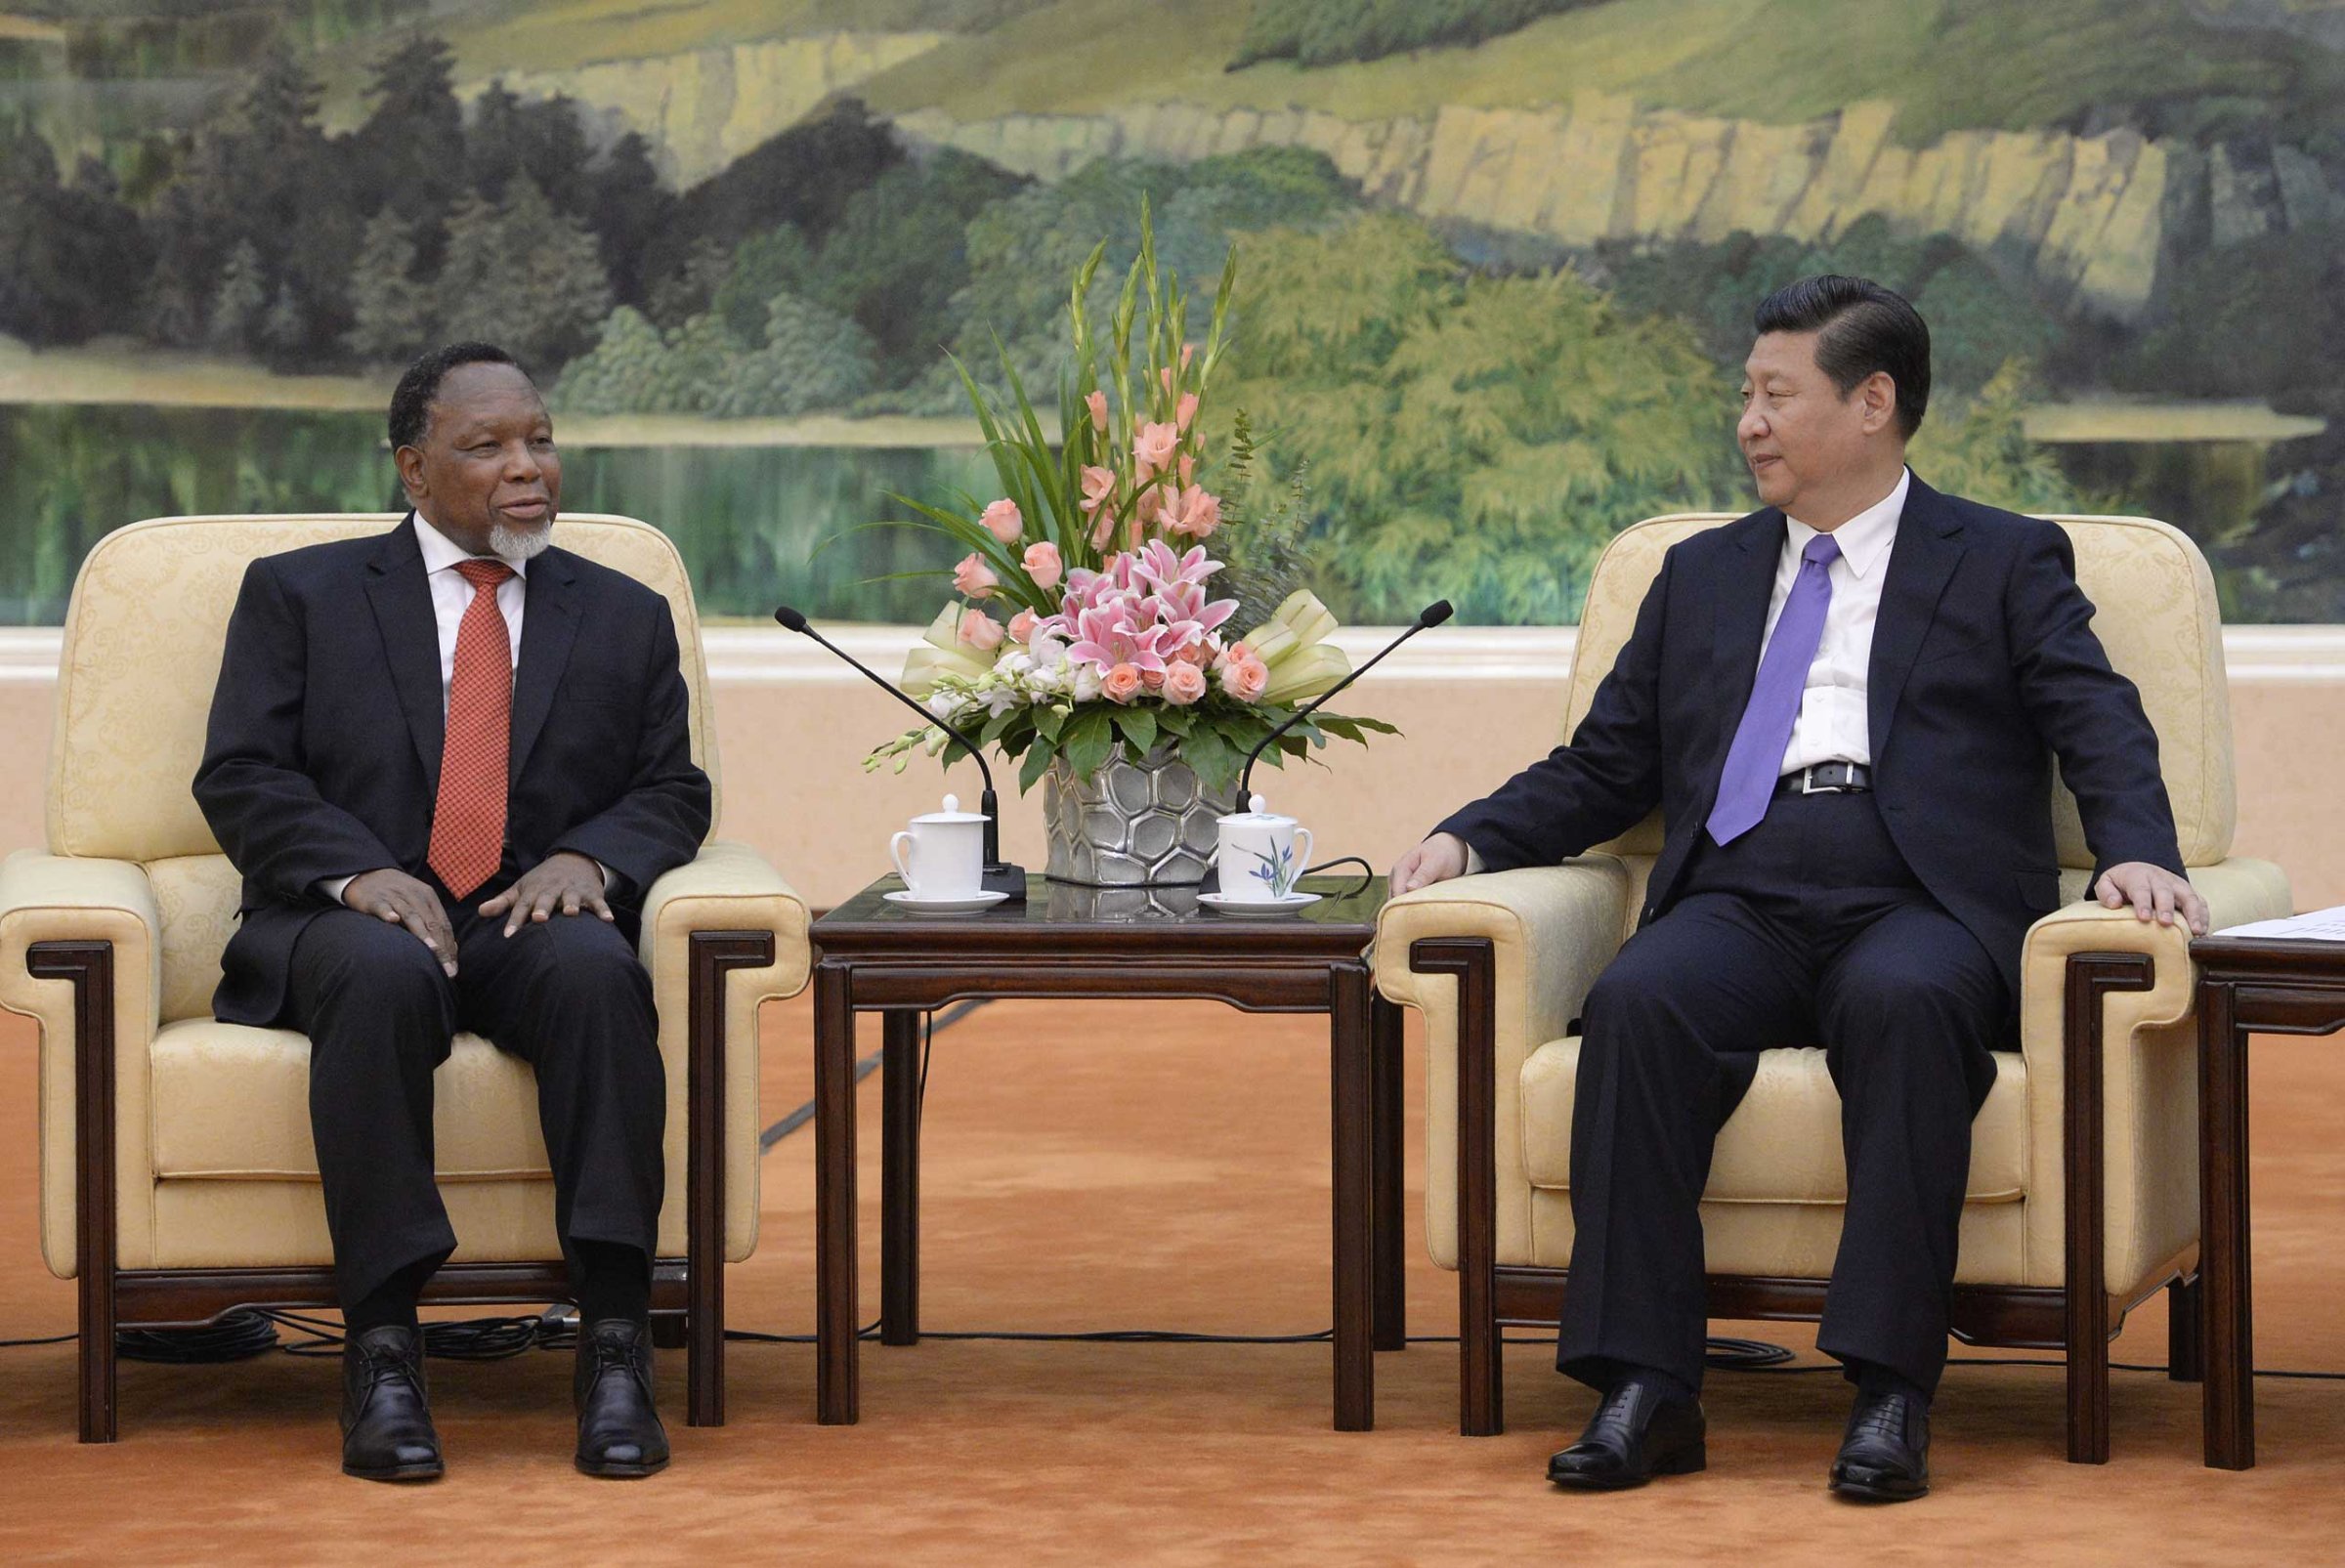 Then-South African Deputy President Kgalema Motlanthe meeting with Chinese President Xi Jinping in Beijing last year. Motlanthe has been announced as the principal of the planned ANC leadership school.